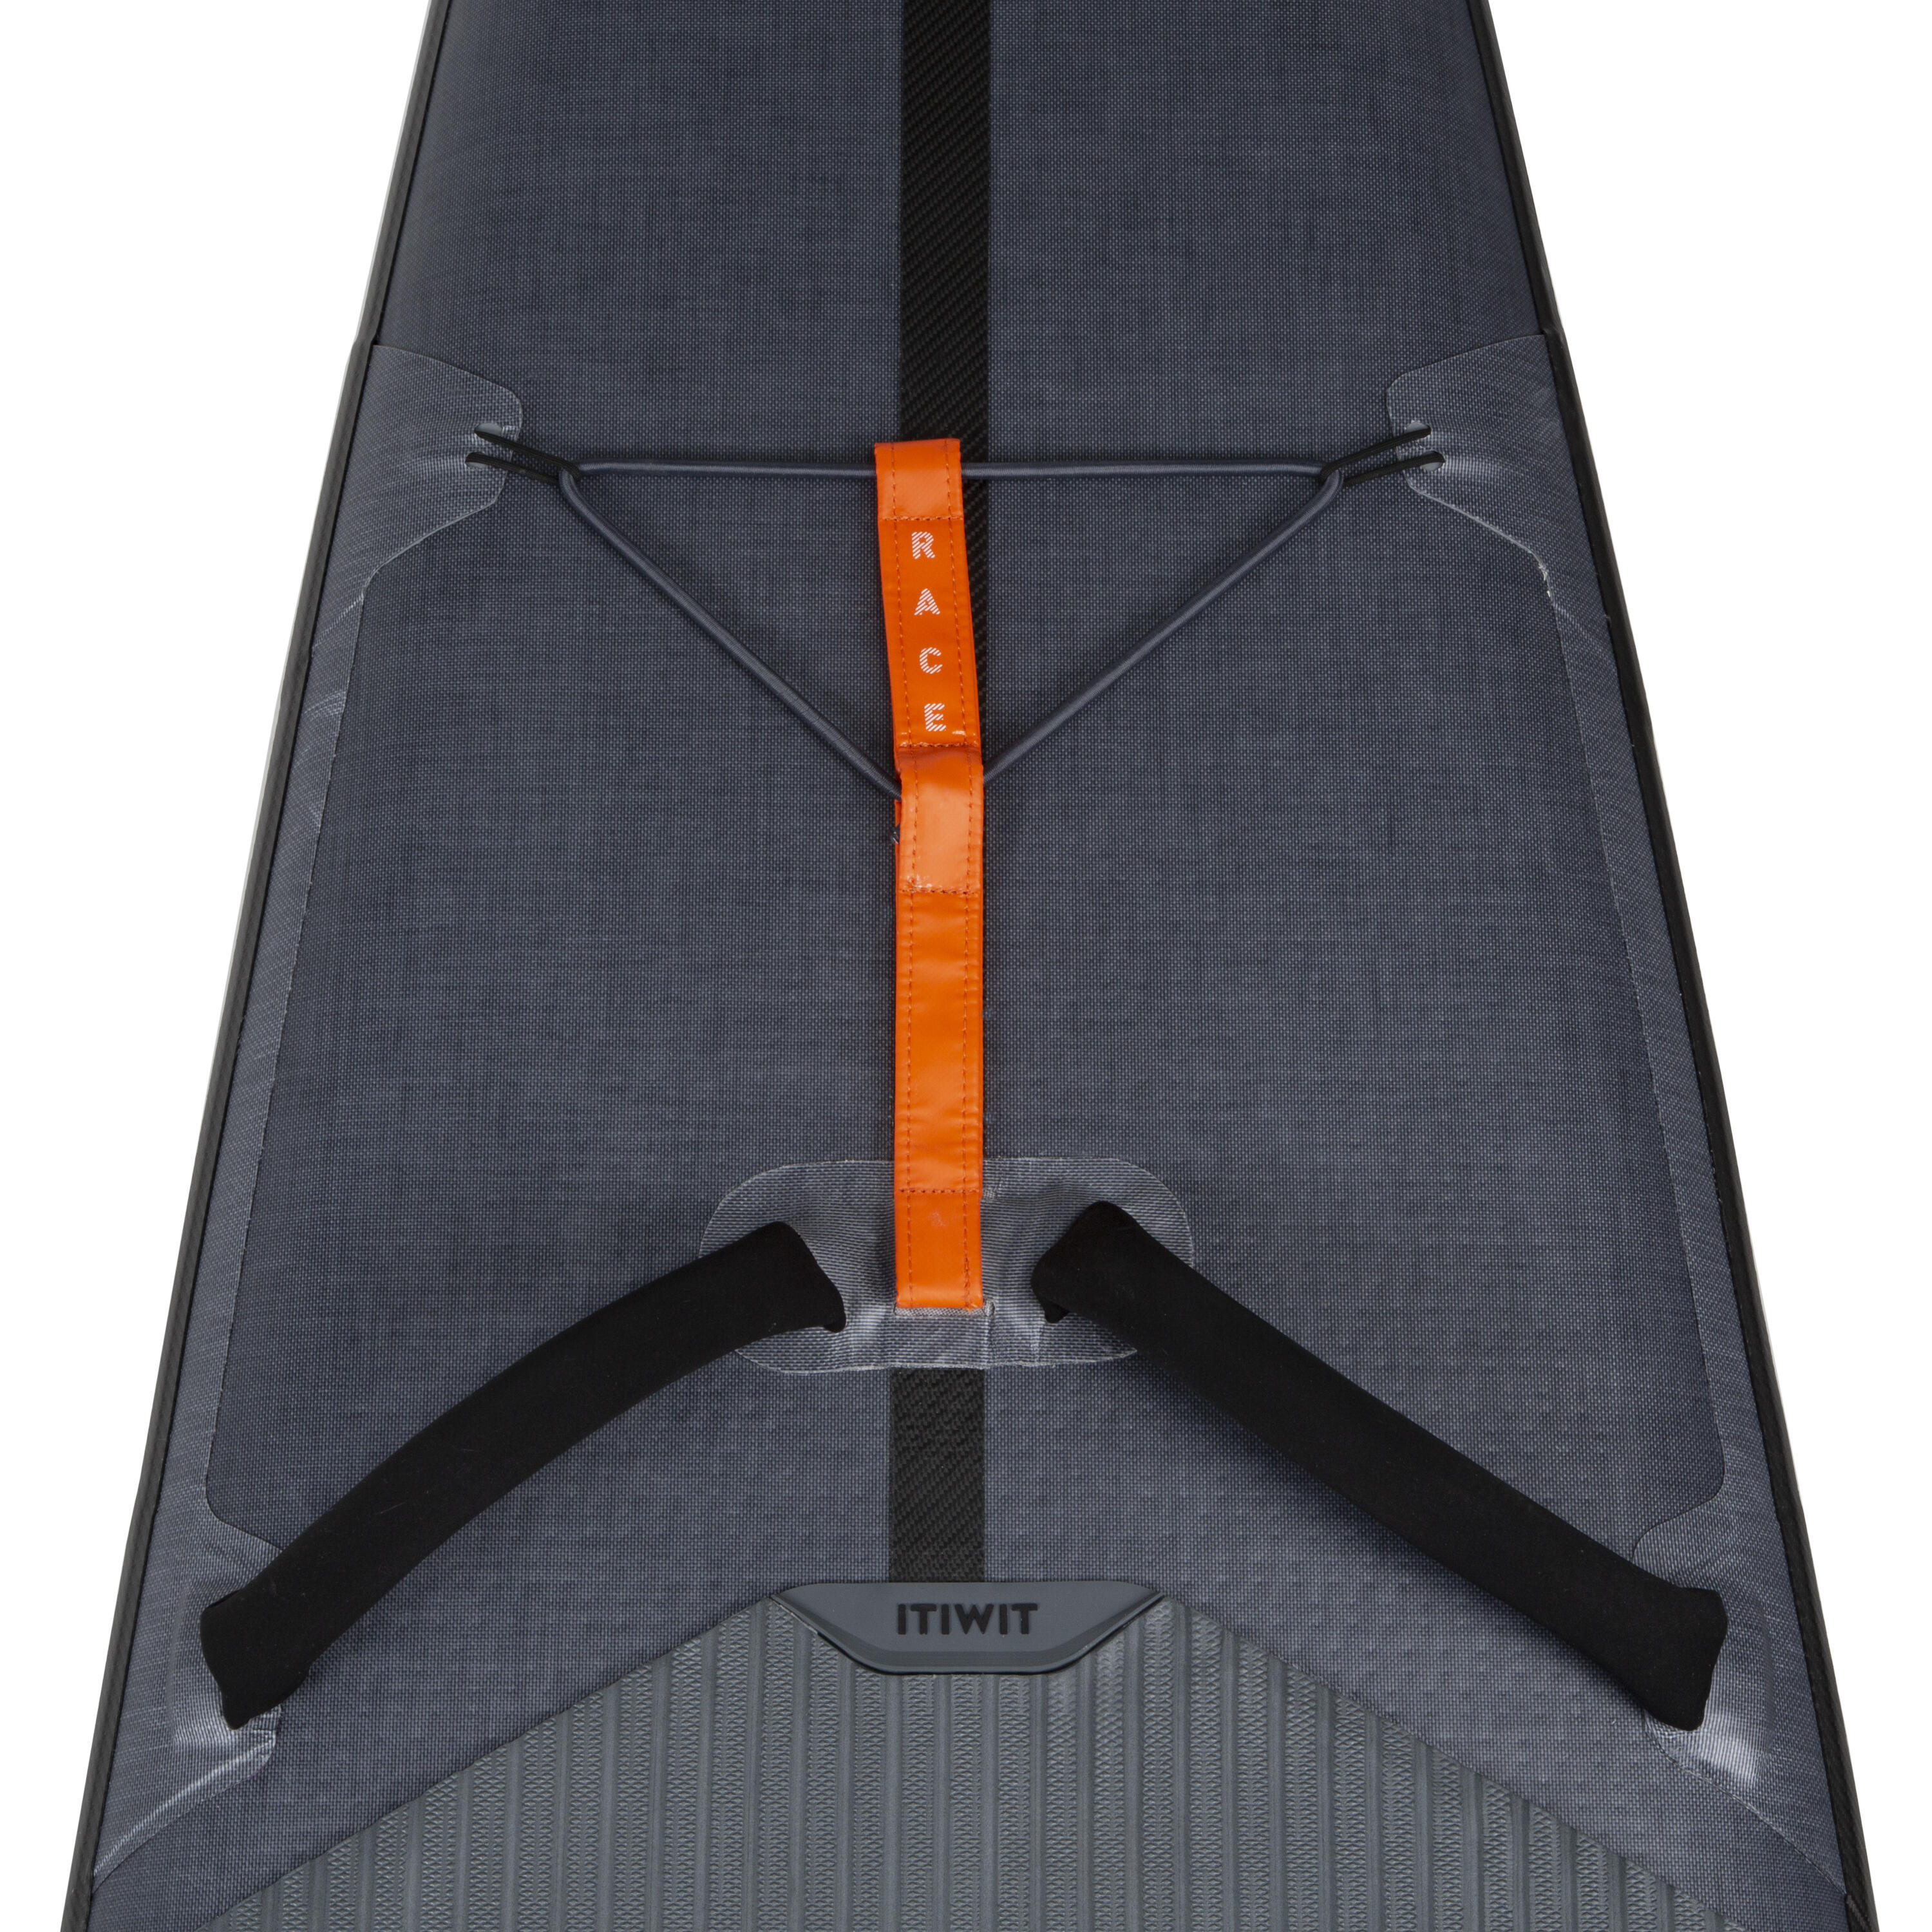 R500 12FT 6" / 26" RACING INFLATABLE STAND-UP PADDLEBOARD 16/30